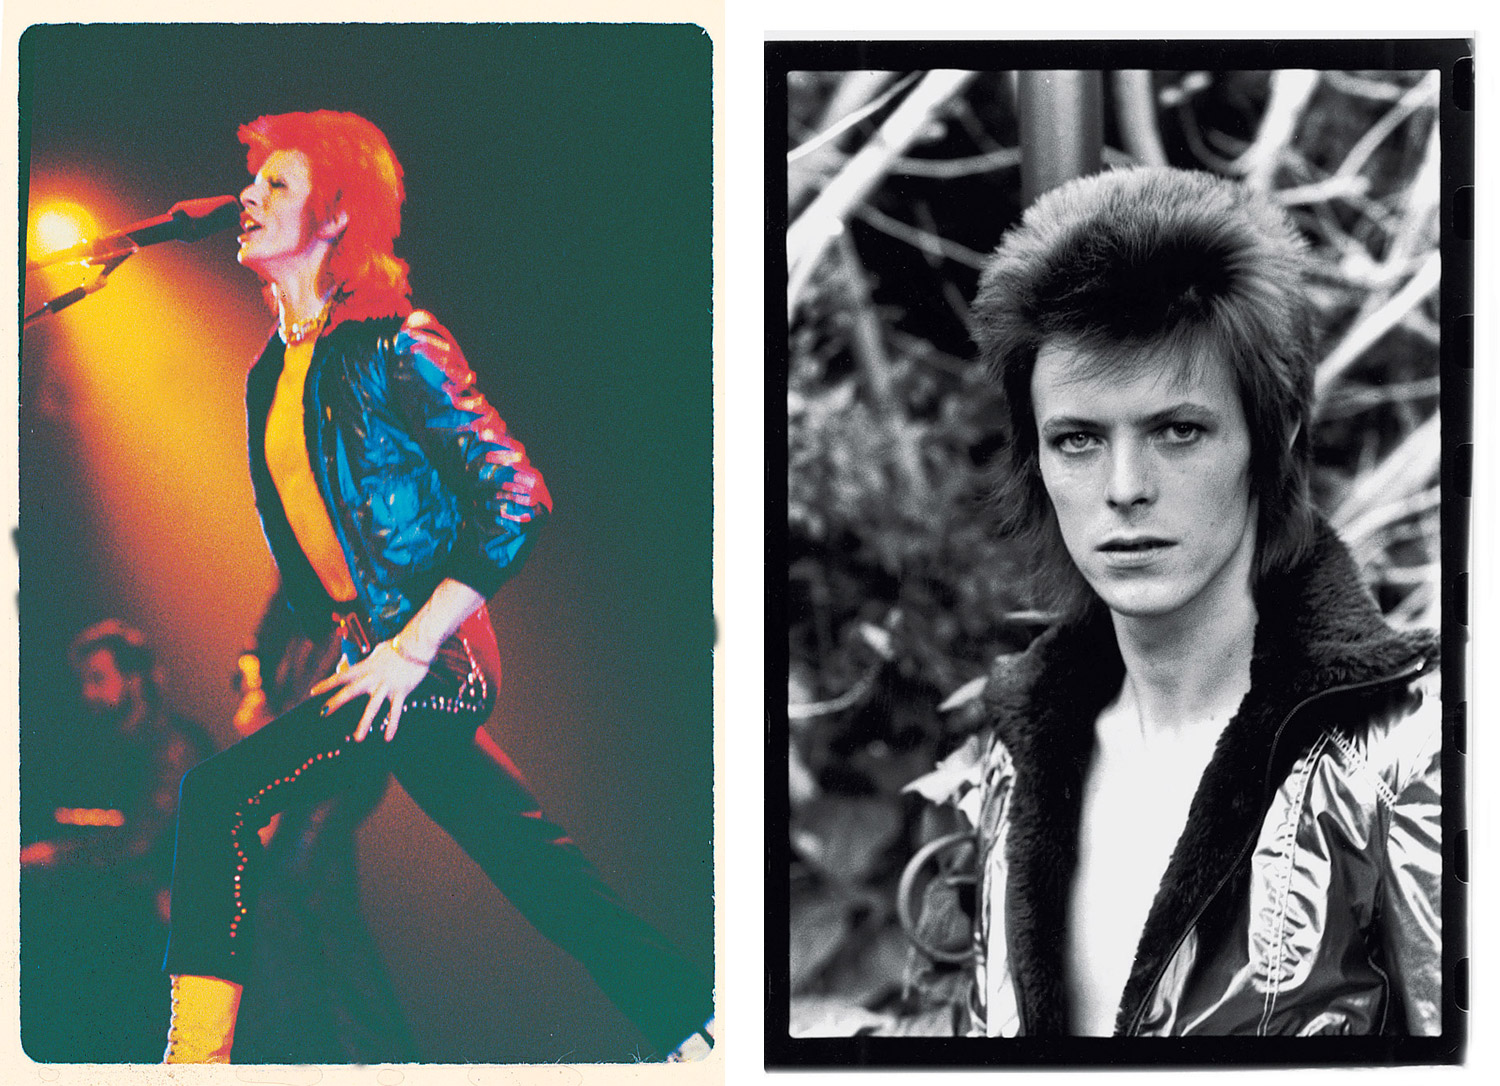 David Bowie x ROXY Collection 